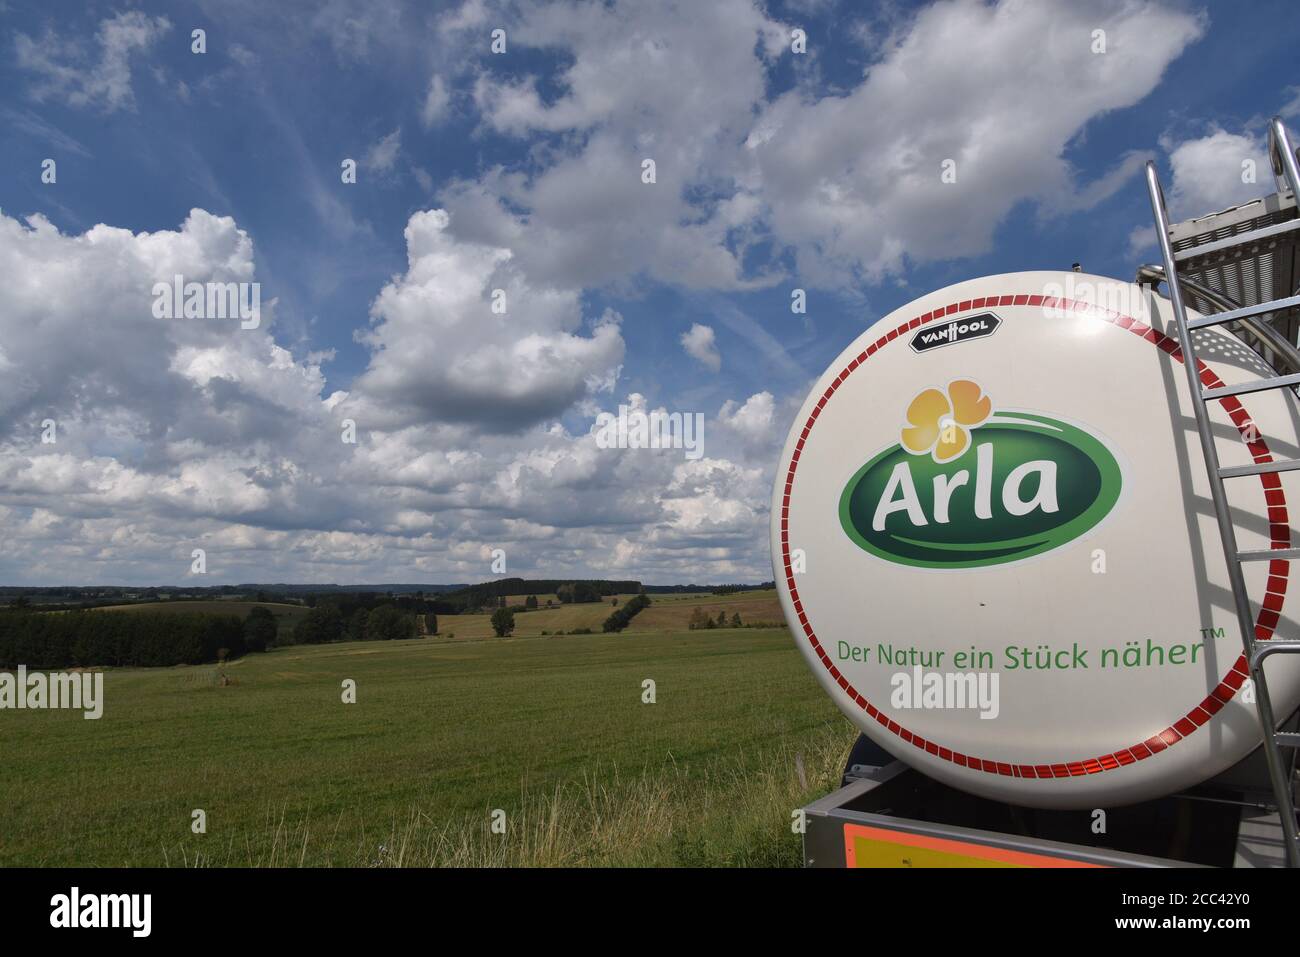 Græsse strubehoved Windswept 16 August 2020, Belgium, Sankt Vith: A milk transporter from the ARLA dairy  with the advertisement "A little closer to nature" is parked by the  roadside next to a field. Photo: Horst